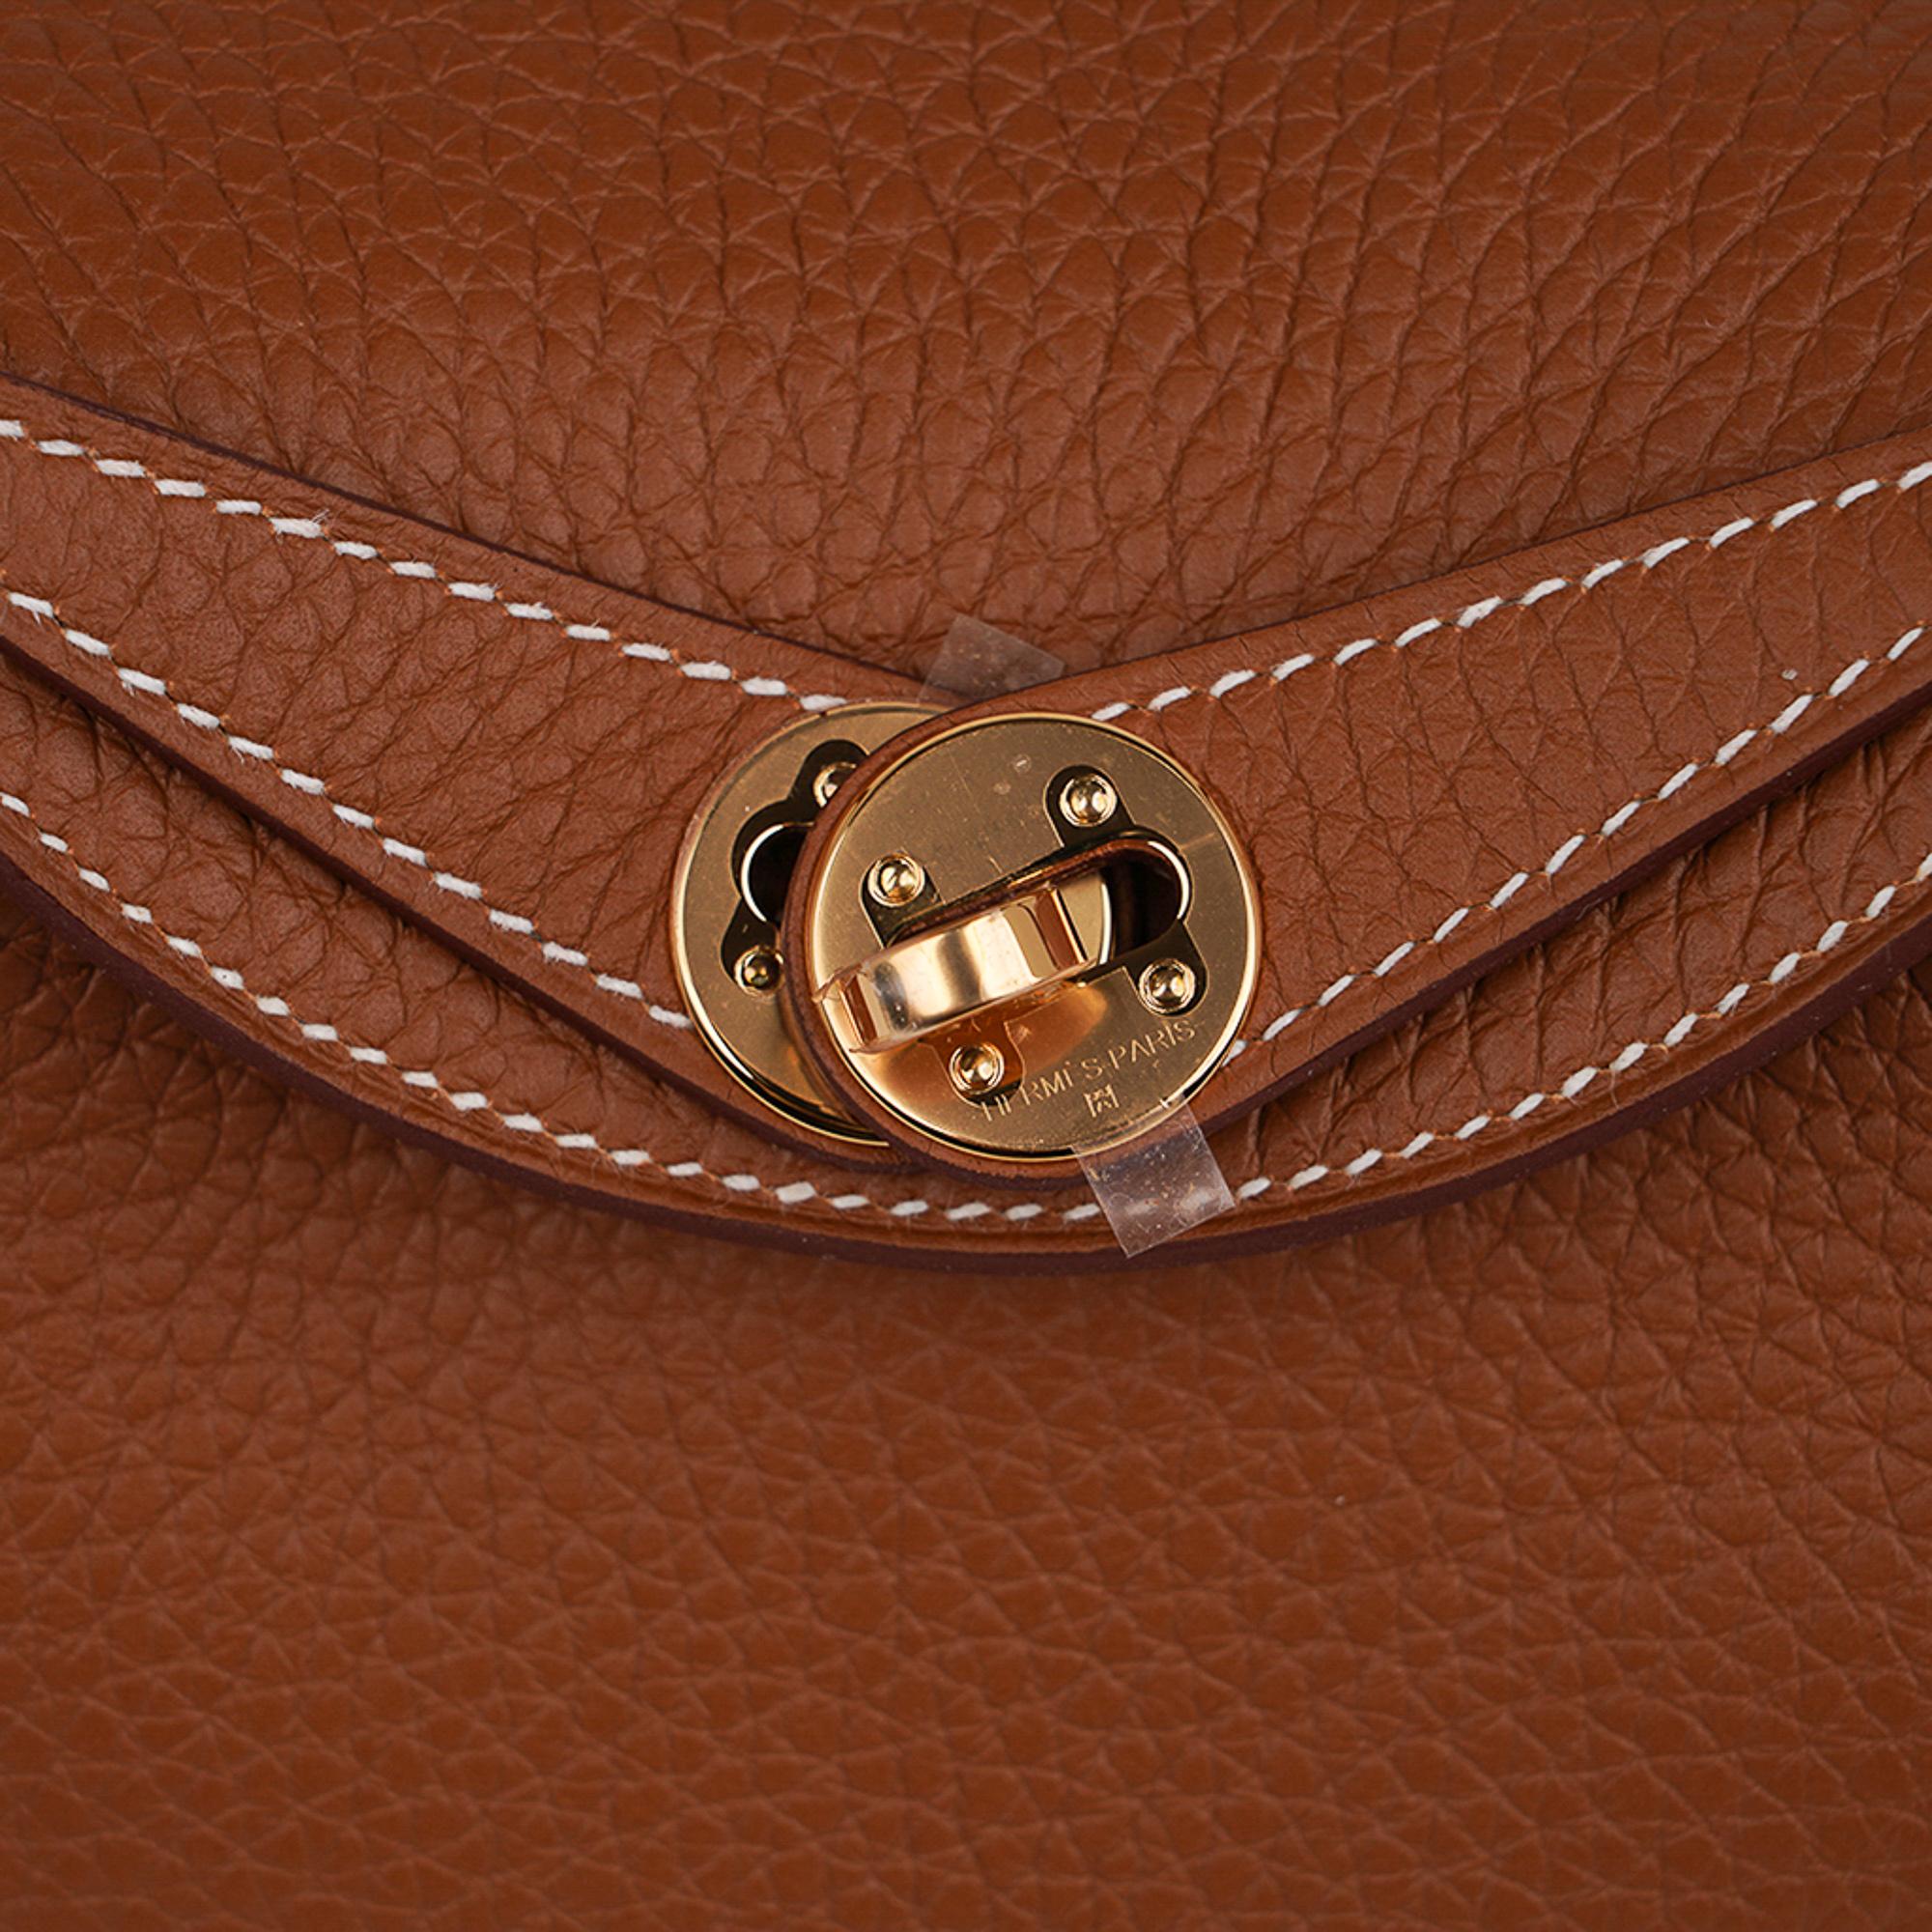 Mightychic offers an Hermes Lindy Mini 20 bag featured in classic neutral Gold
Supple soft Clemence leather.
Lush with gold hardware.
This versatile bag can be carried by hand, crossbody or on the shoulder.
Spacious interior with an interior pocket